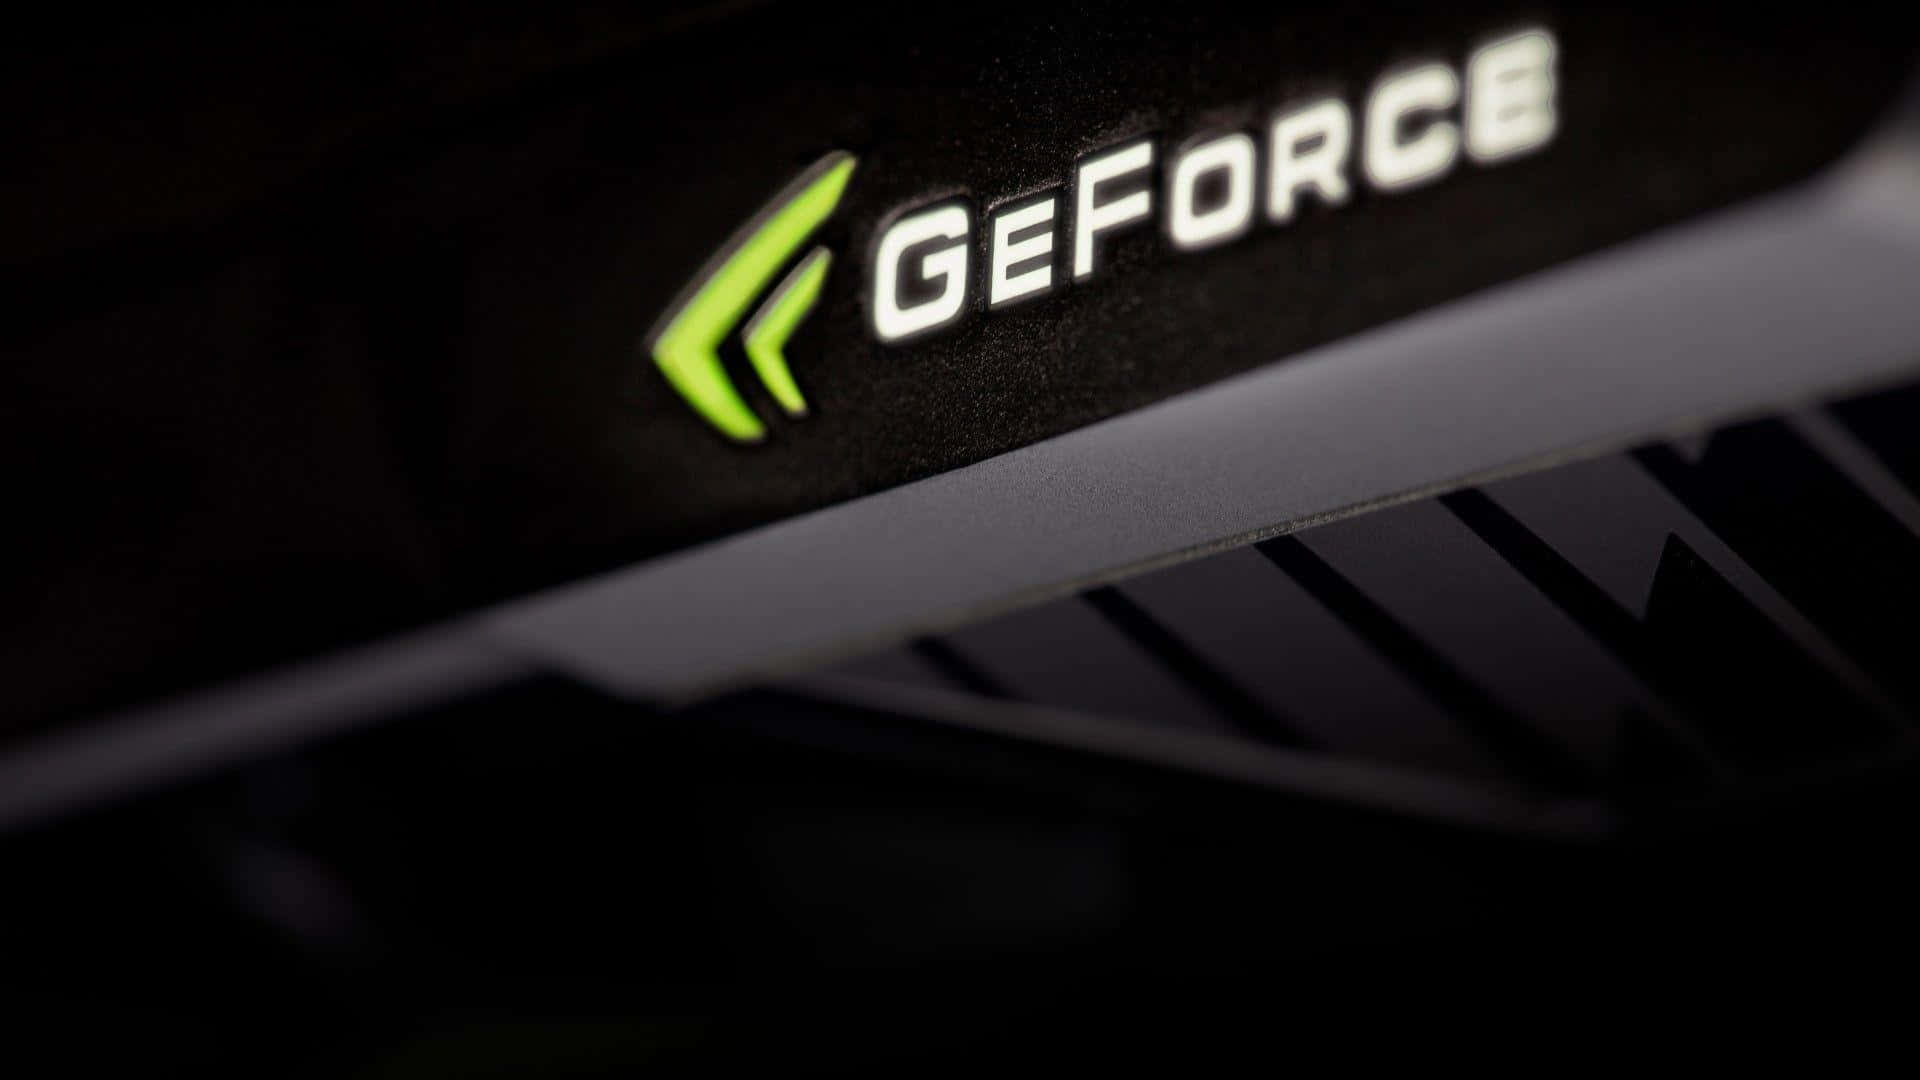 "Power Your Graphics with Nvidia"